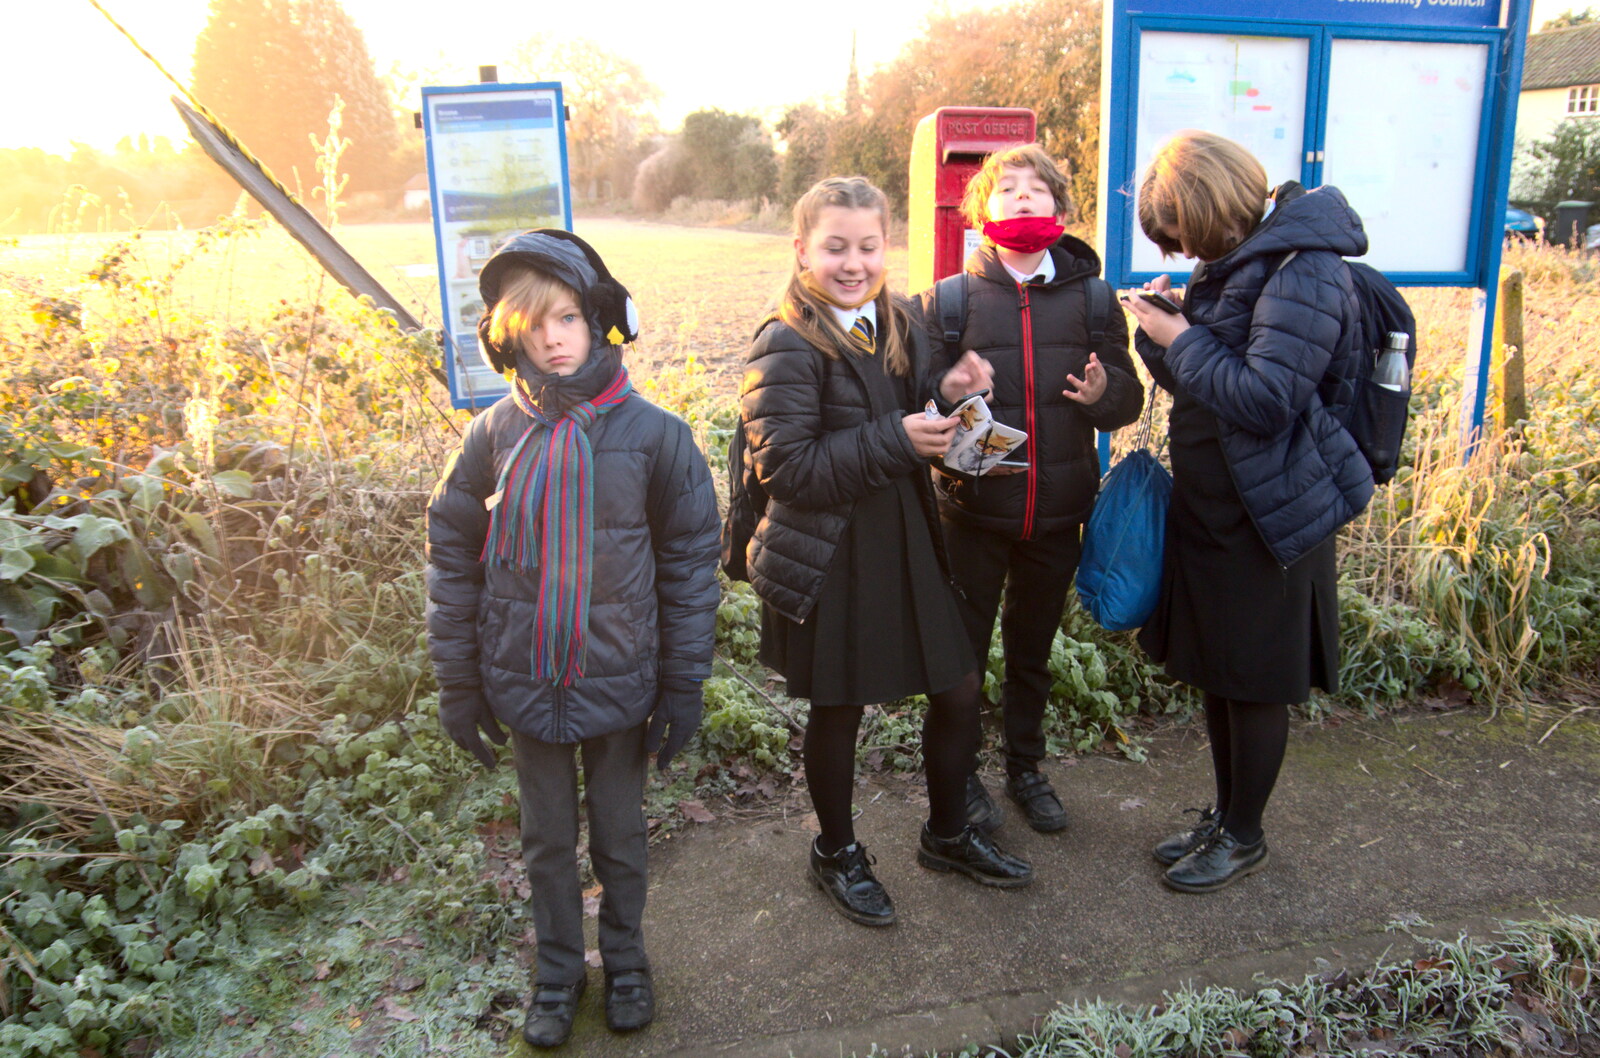 Waiting at the bus stop, with phones from A Return to the Oaksmere, Brome, Suffolk - 8th December 2020